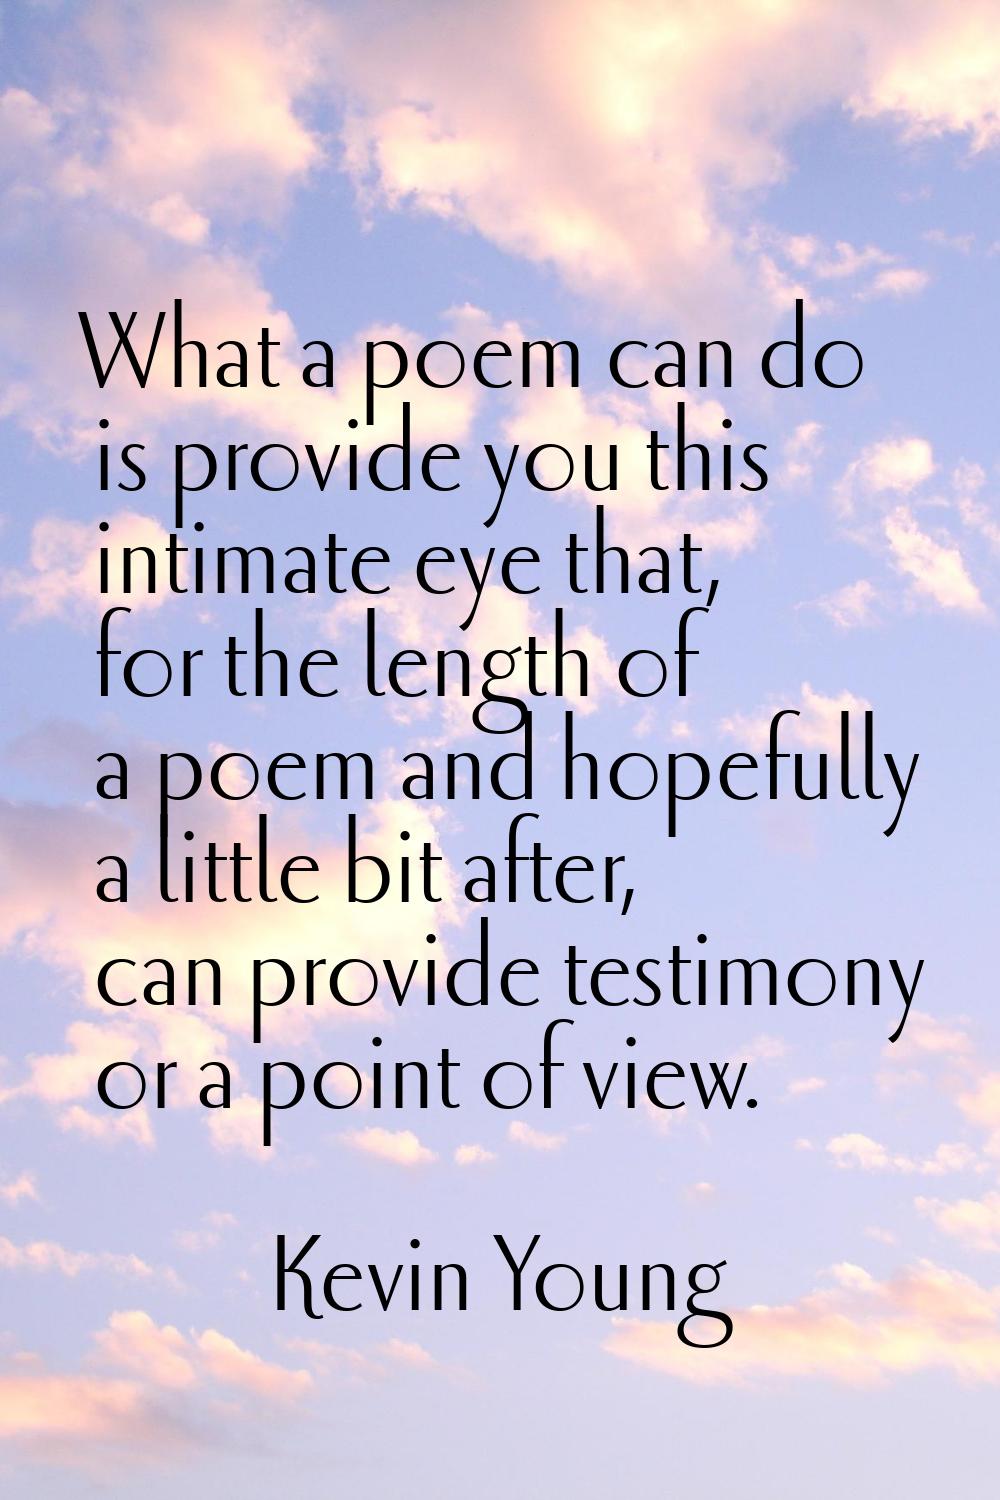 What a poem can do is provide you this intimate eye that, for the length of a poem and hopefully a 